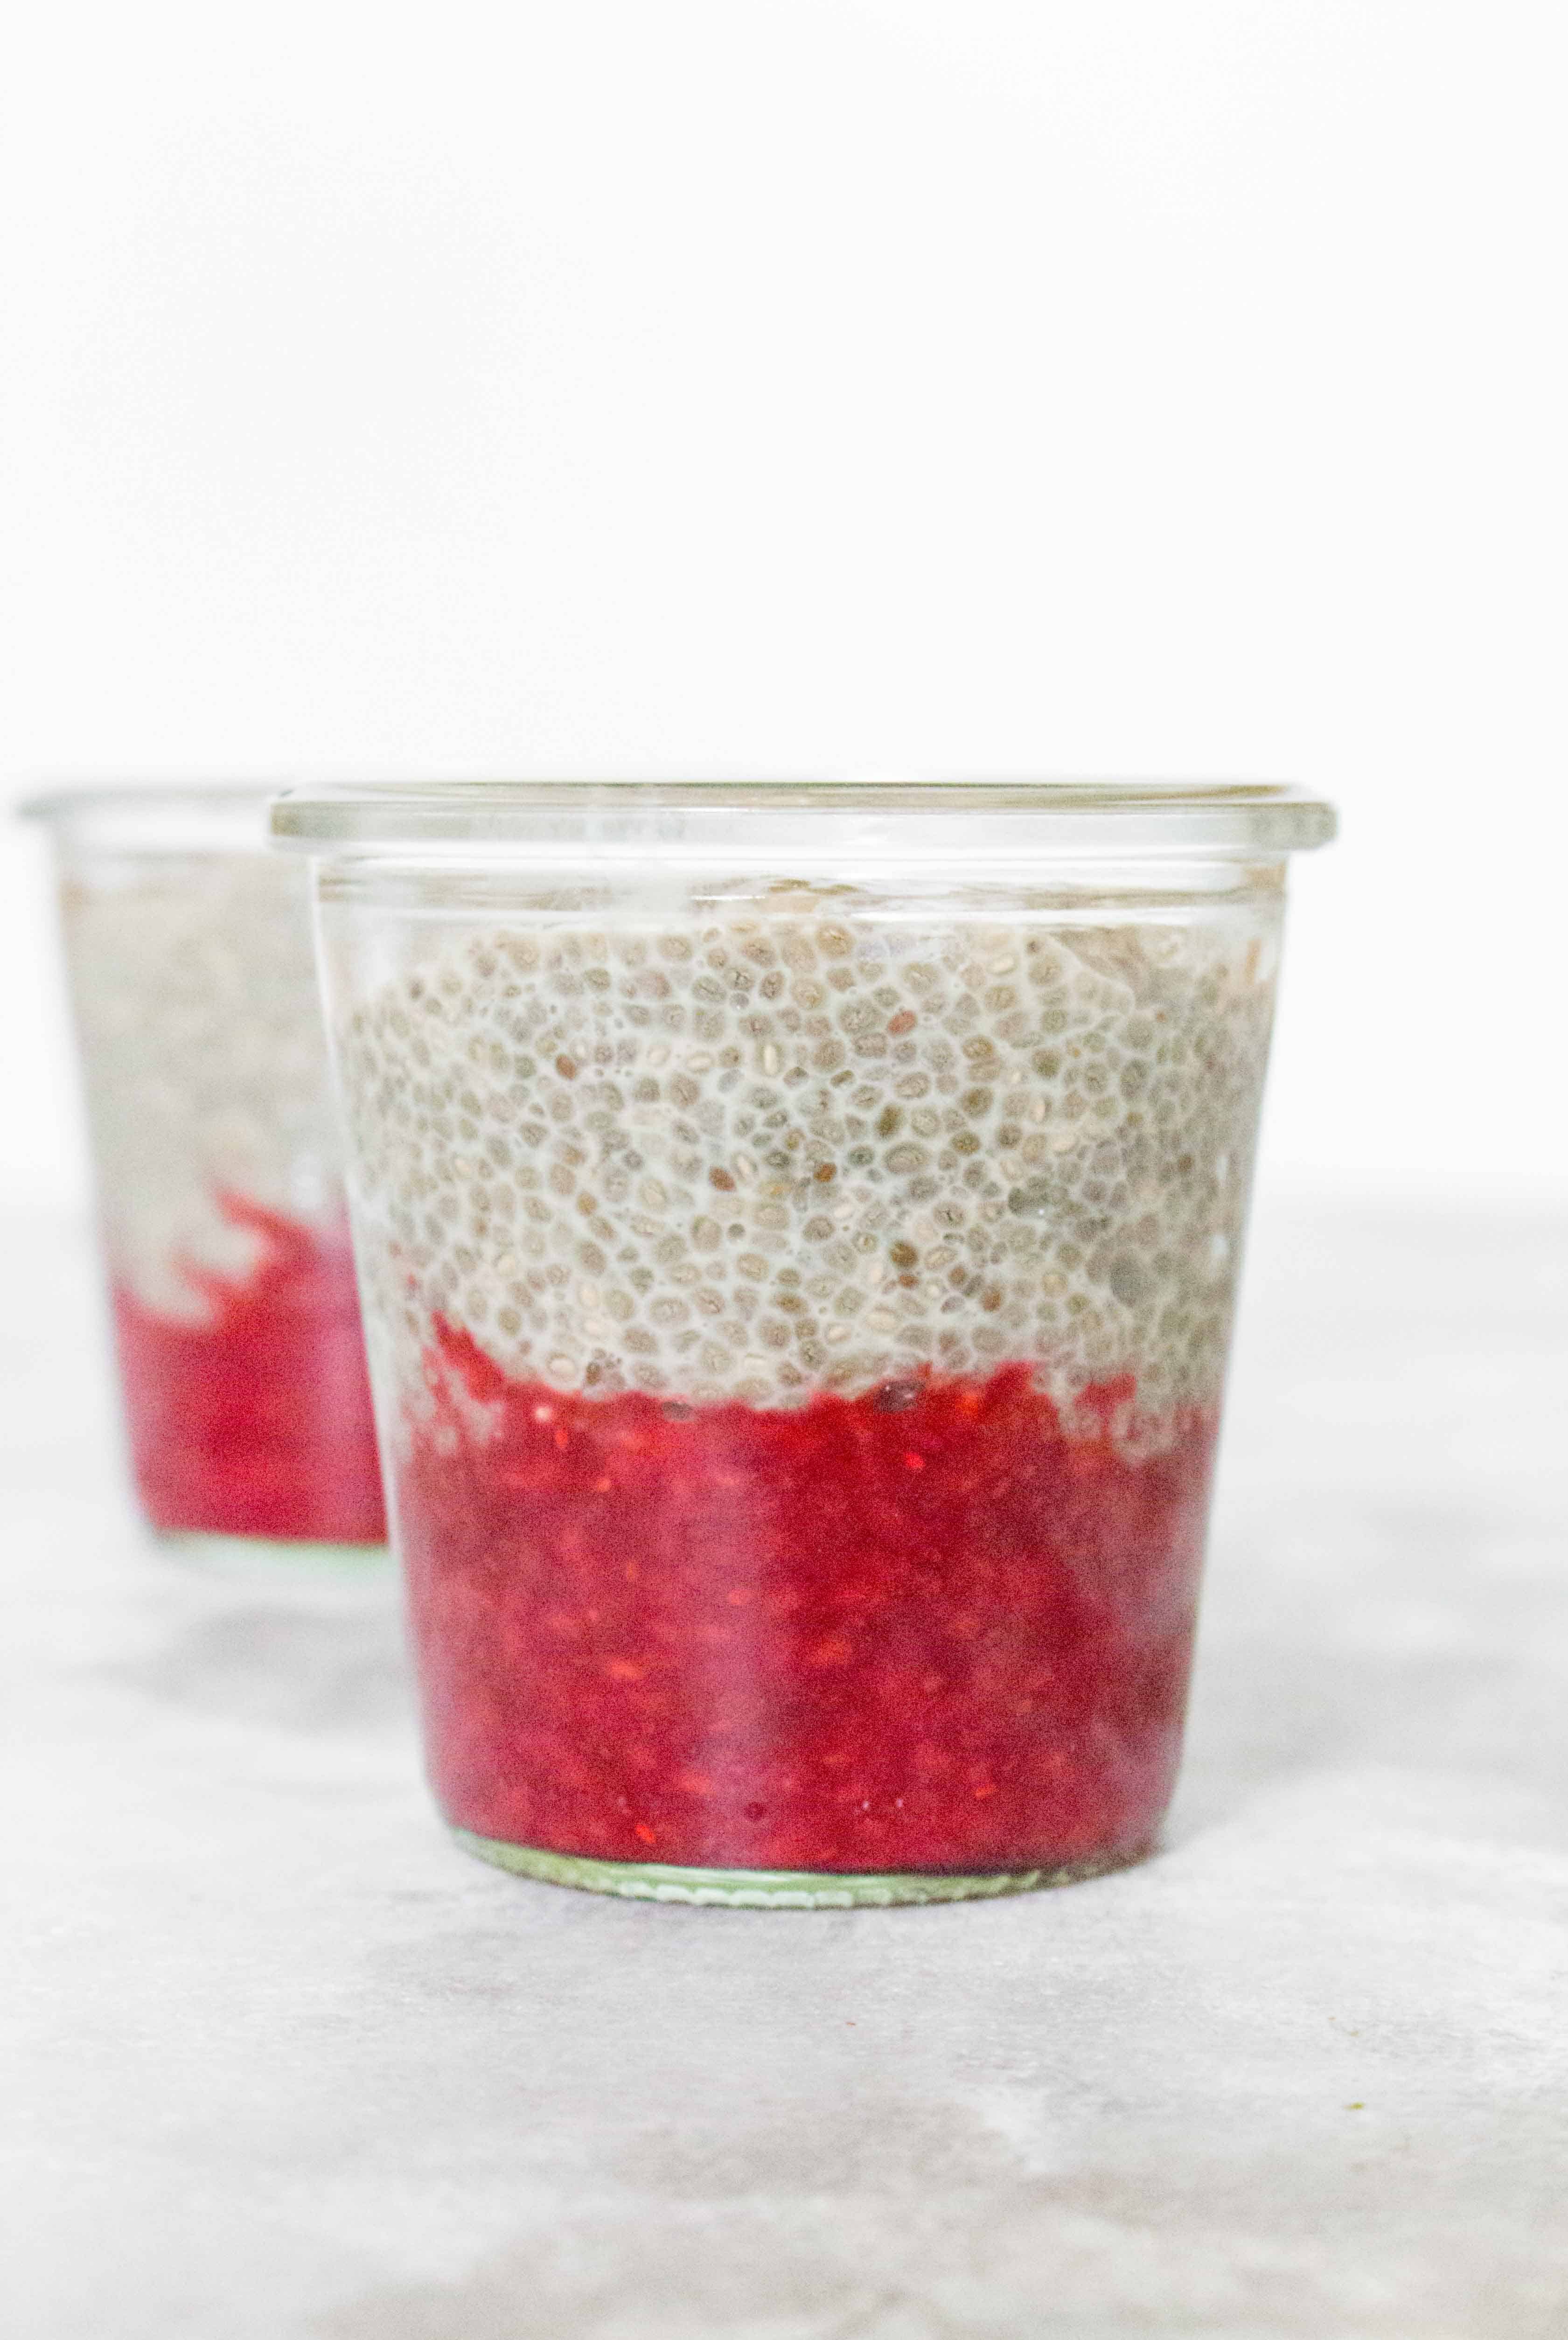 Looking for an easy chia pudding recipe? Use this post to learn how to make chia pudding!